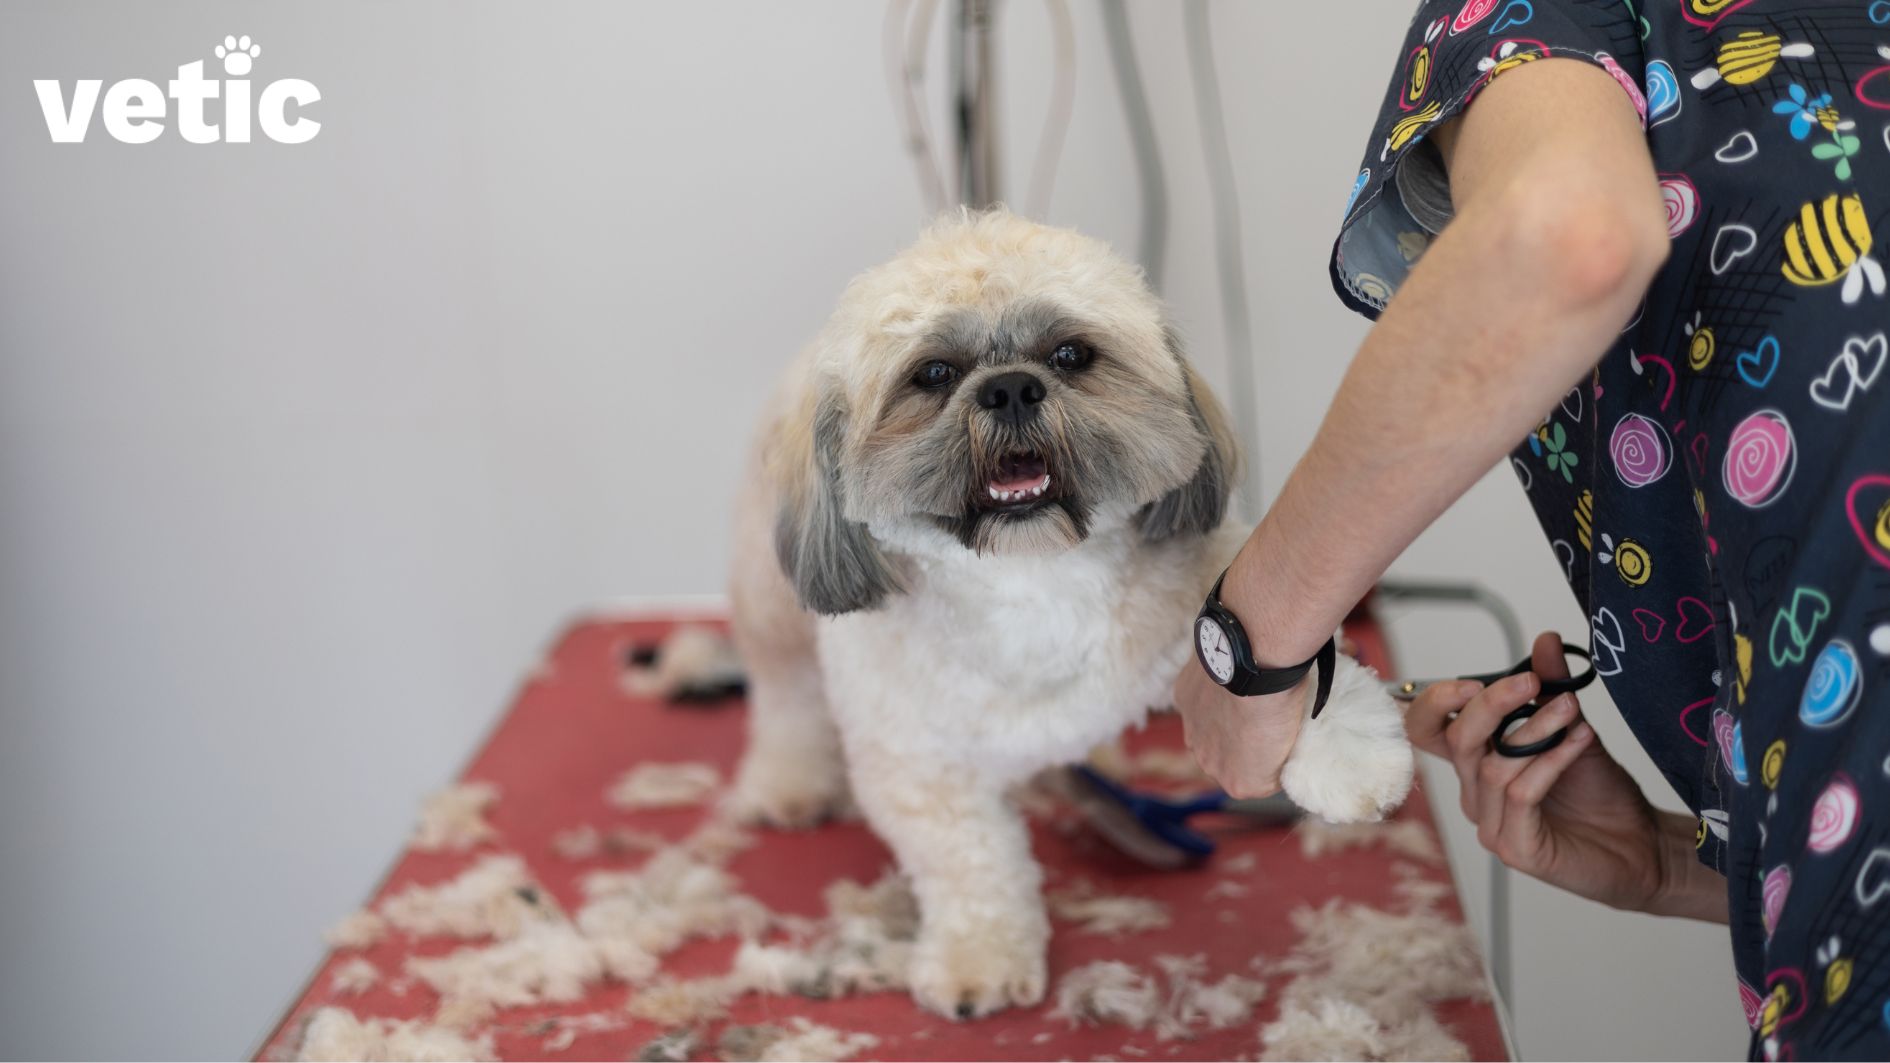 A happy Shih Tzu breed adult dog on a grooming table. They are being groomed with professional scissors by a professional groomer wearing a printed on black scrub.